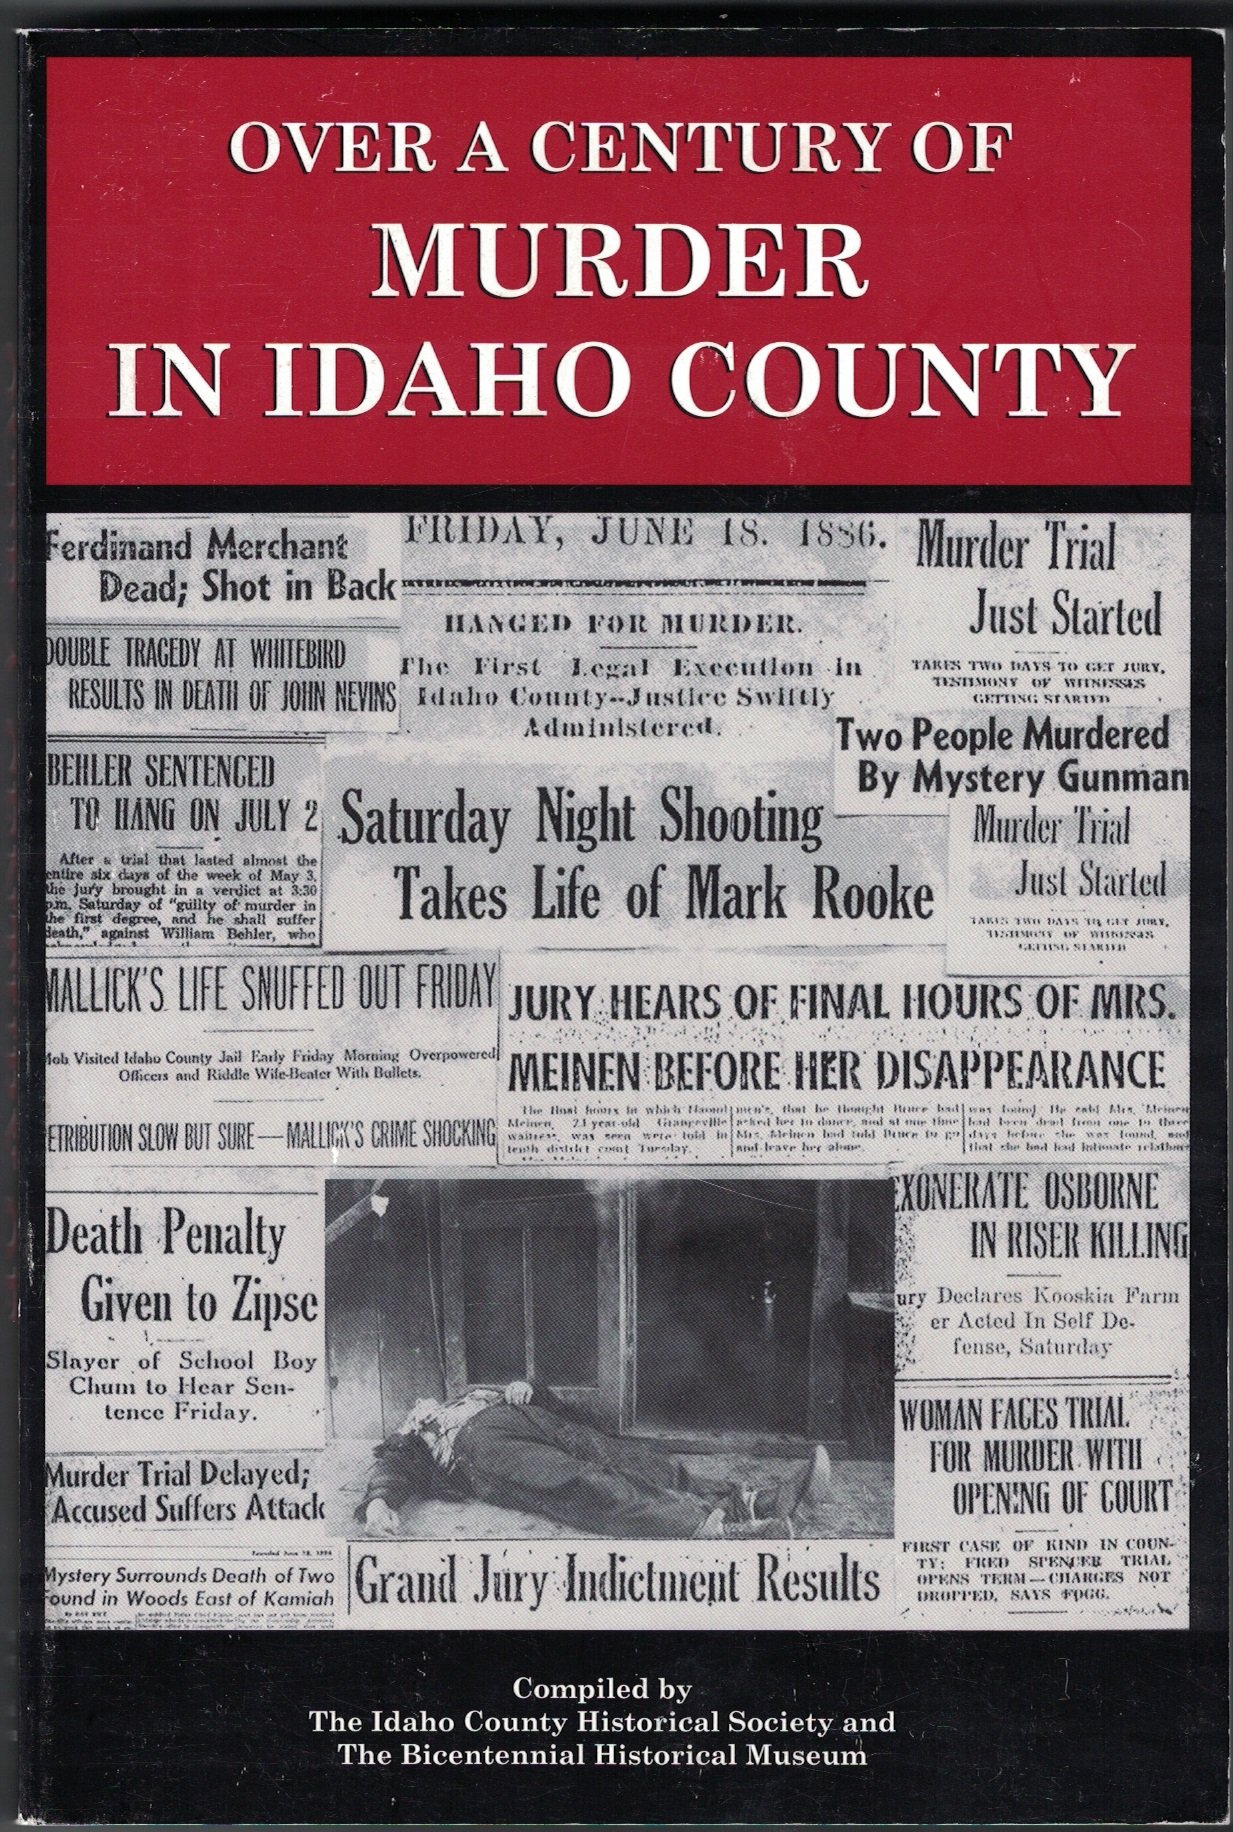 Over a century of murder in Idaho County, 1861-1994 (book cover)